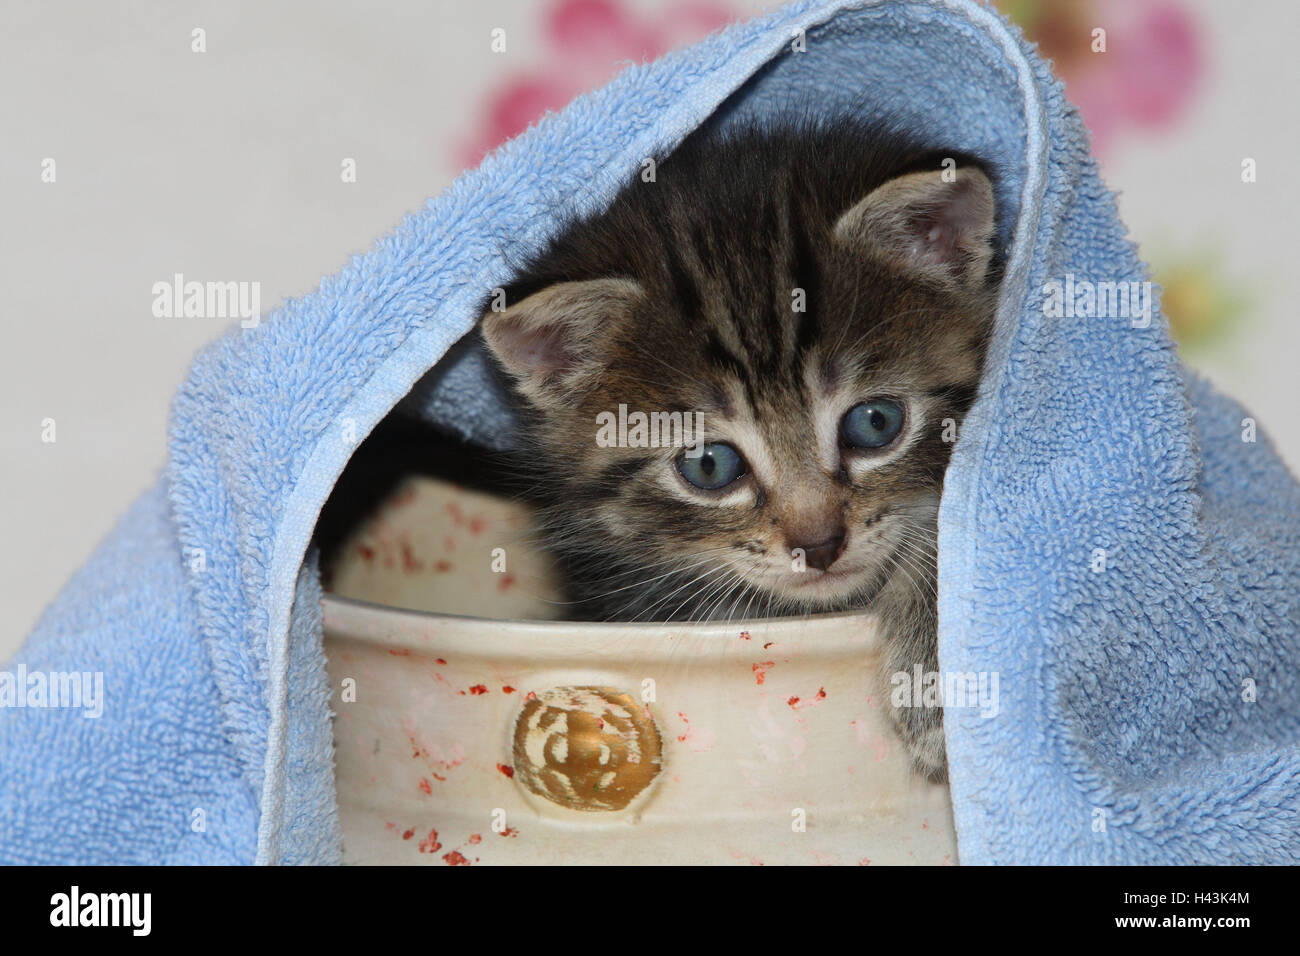 Pot, cat, young, herauskrabbeln, towel, bed, animals, mammals, pets, small cats, Felidae, domesticates, house cat, young animal, kitten, small, awkward, clumsy, creep, creep, curiosity, hiding place, play, hide, sweetly, individually, only, striped, tin, bowl, hervorblicken, hervorschauen, young animals, animal baby, inside, Stock Photo